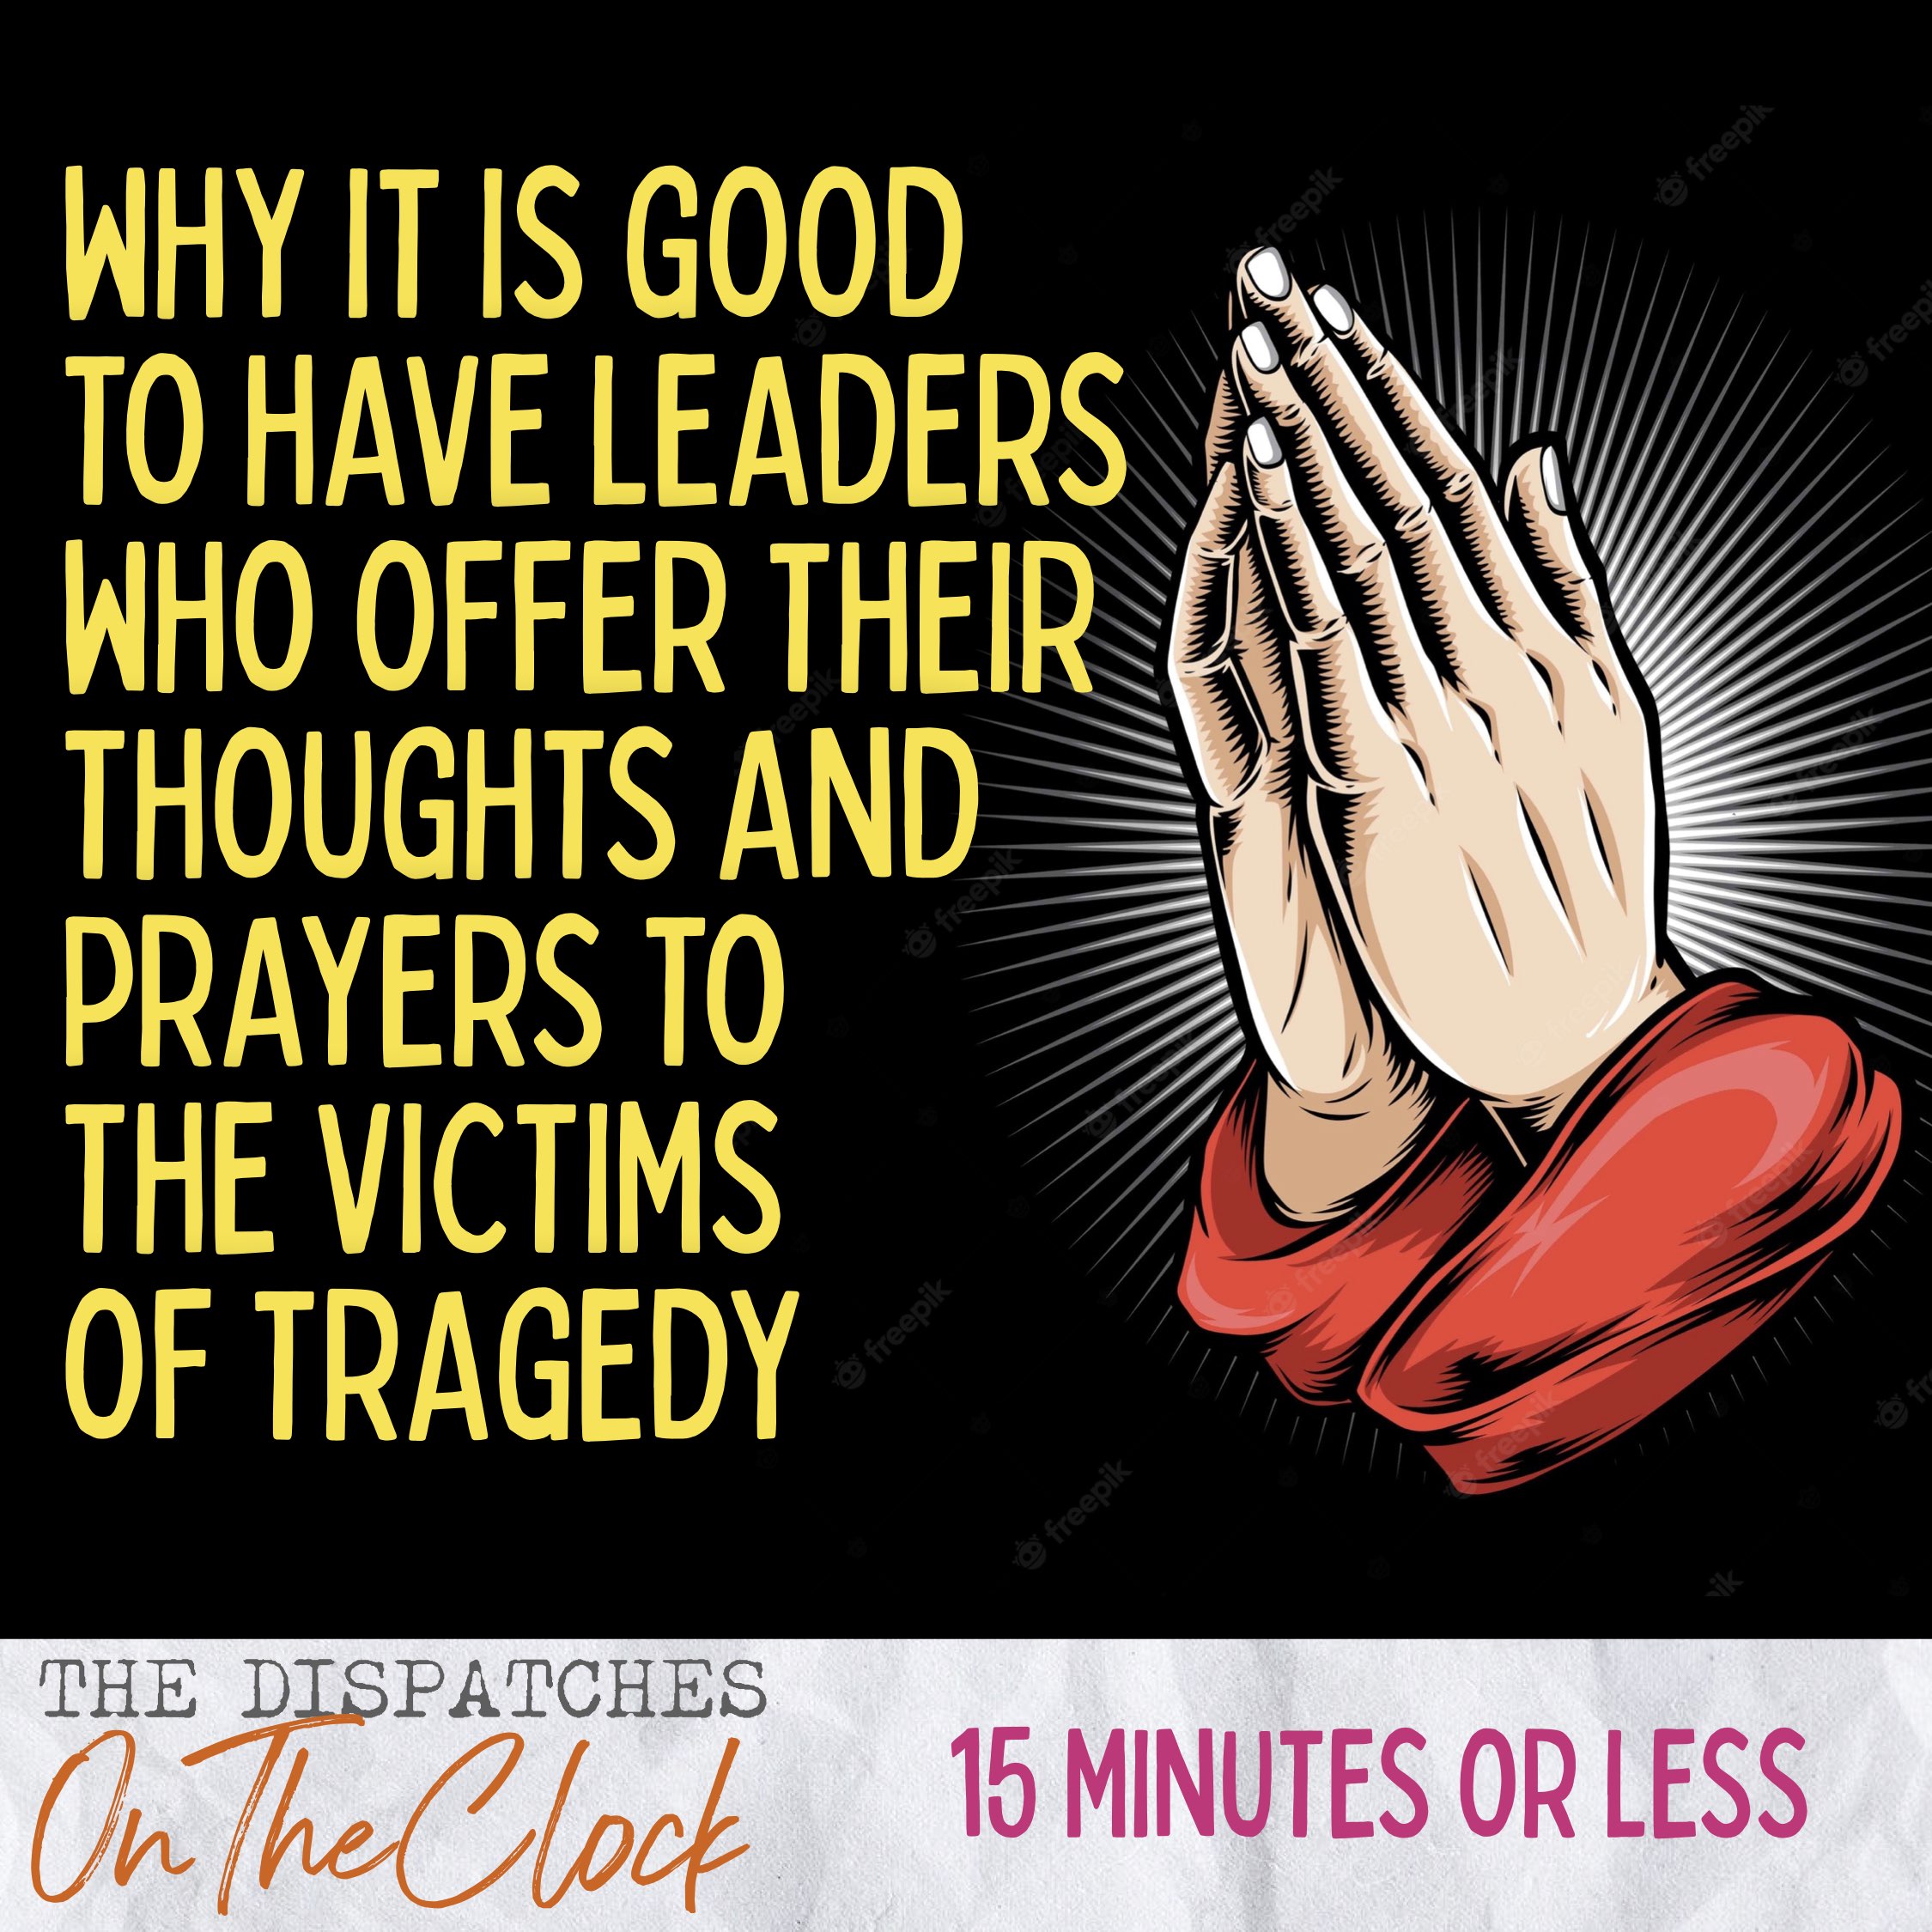 ON THE CLOCK | Why it is Good to Have Leaders Who Offer Their Thoughts and Prayers to Victims of Suffering